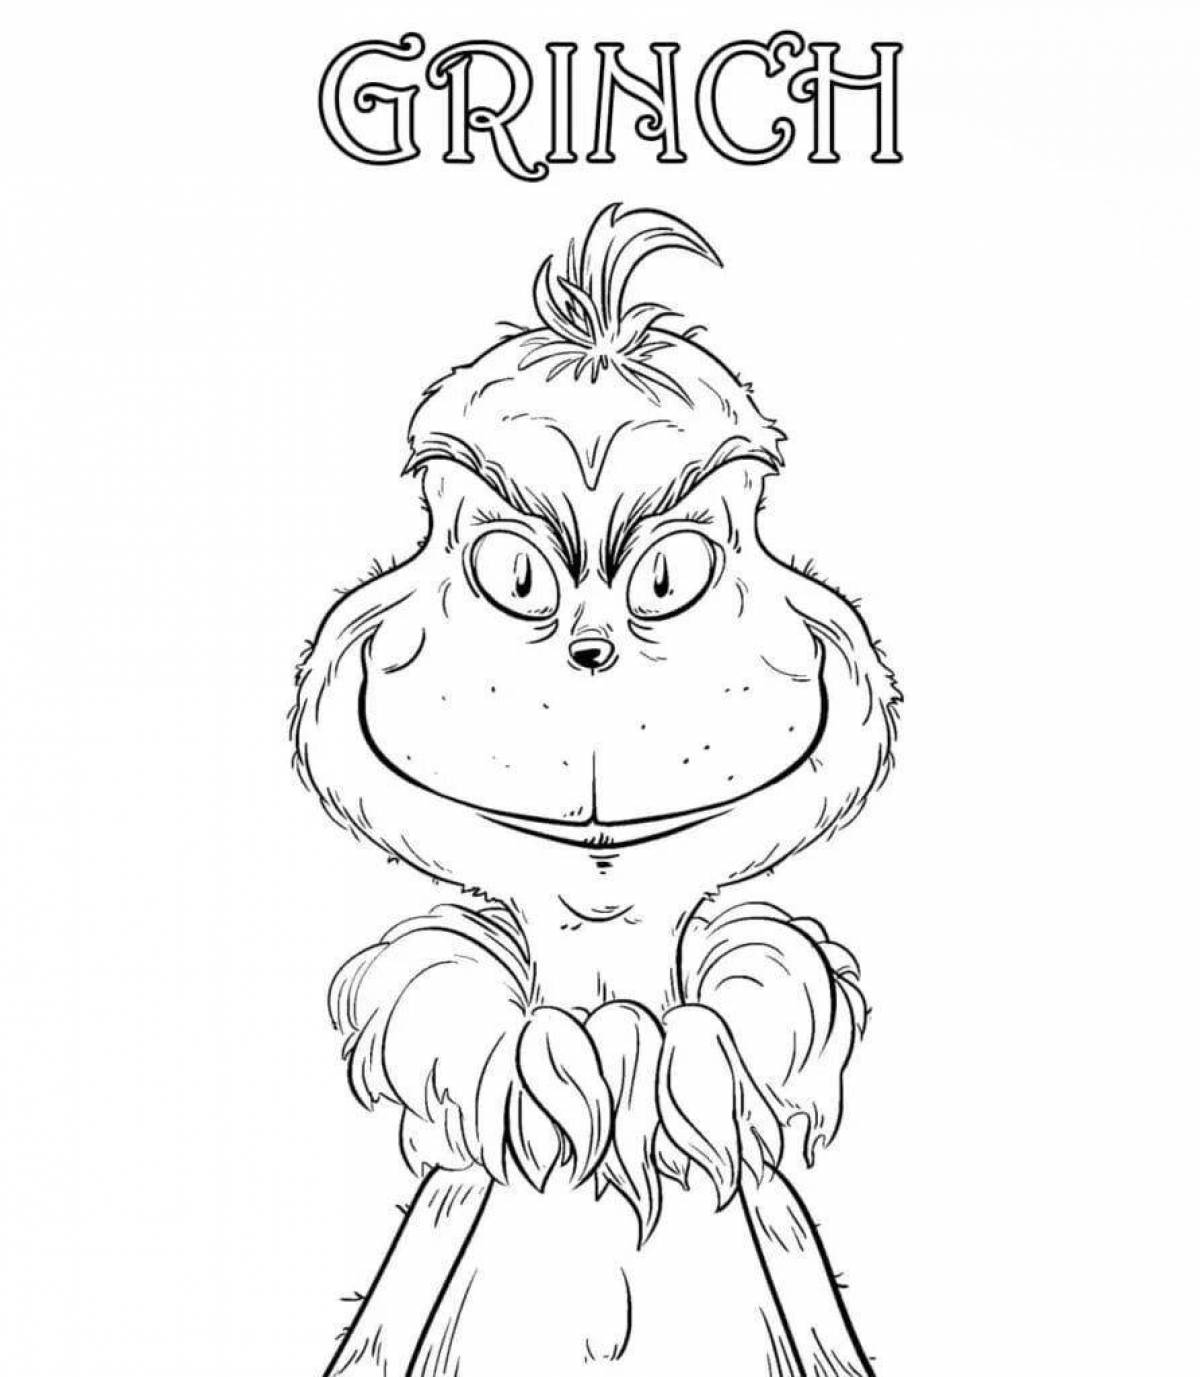 Magic grinch coloring for kids